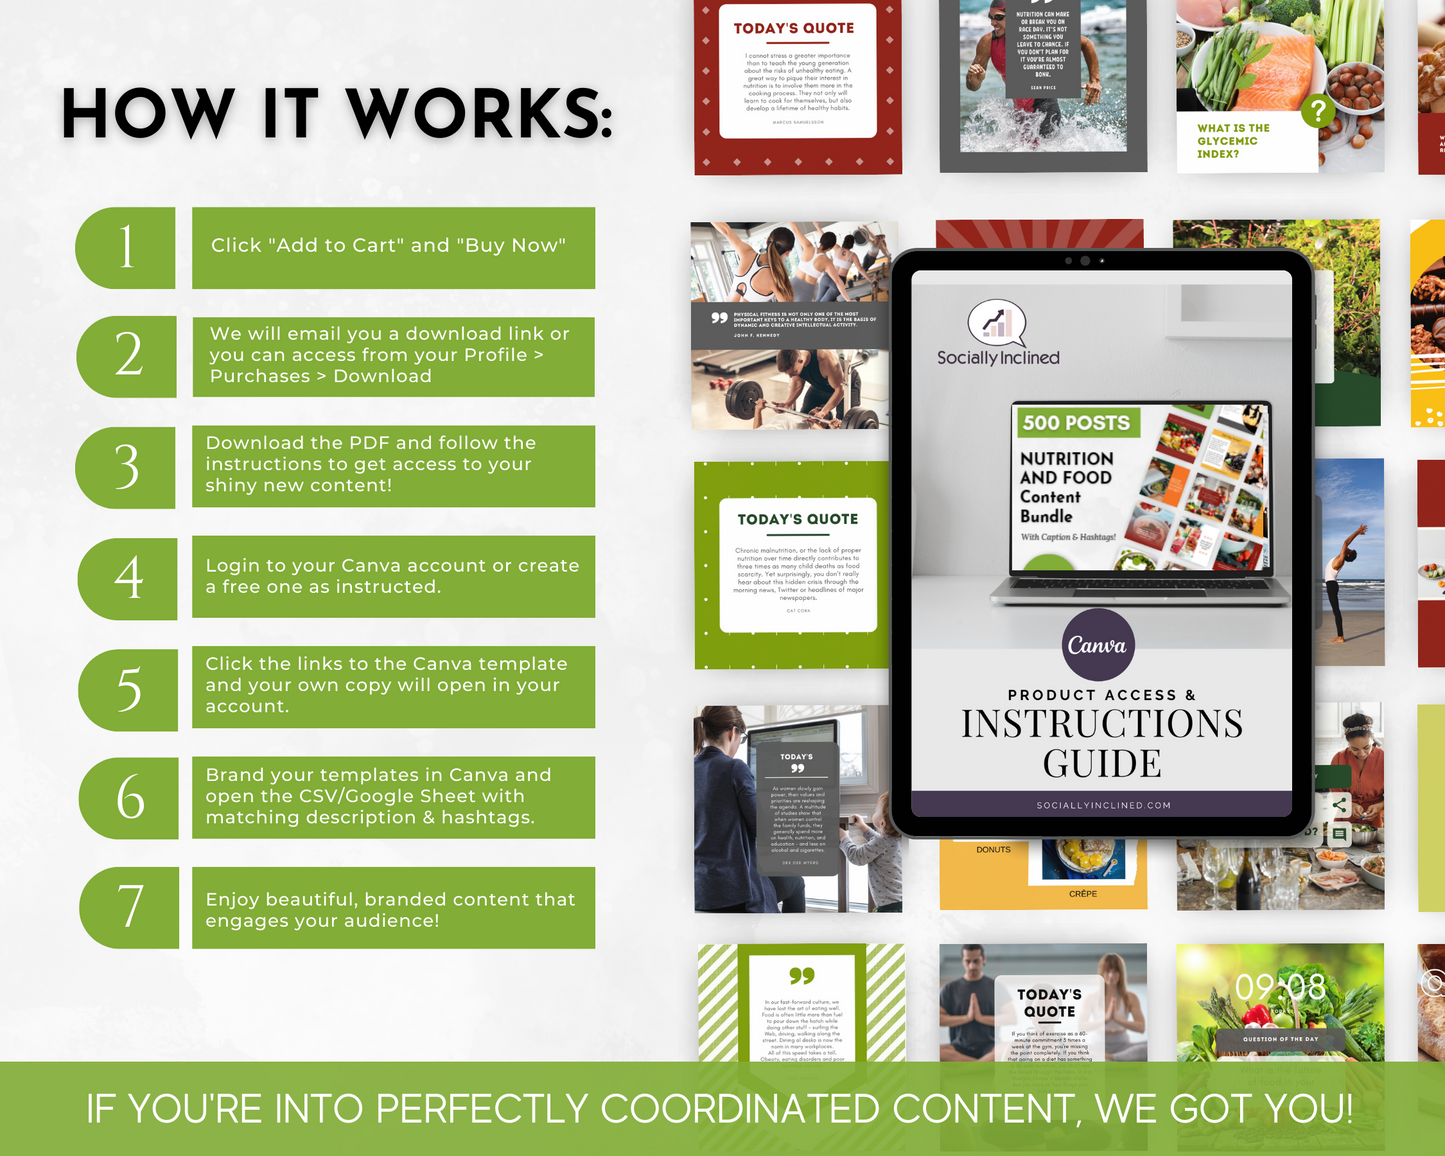 Instruction guide for understanding how the Nutrition & Food Social Media Post Bundle | 500 Posts with Canva Templates from Socially Inclined works.